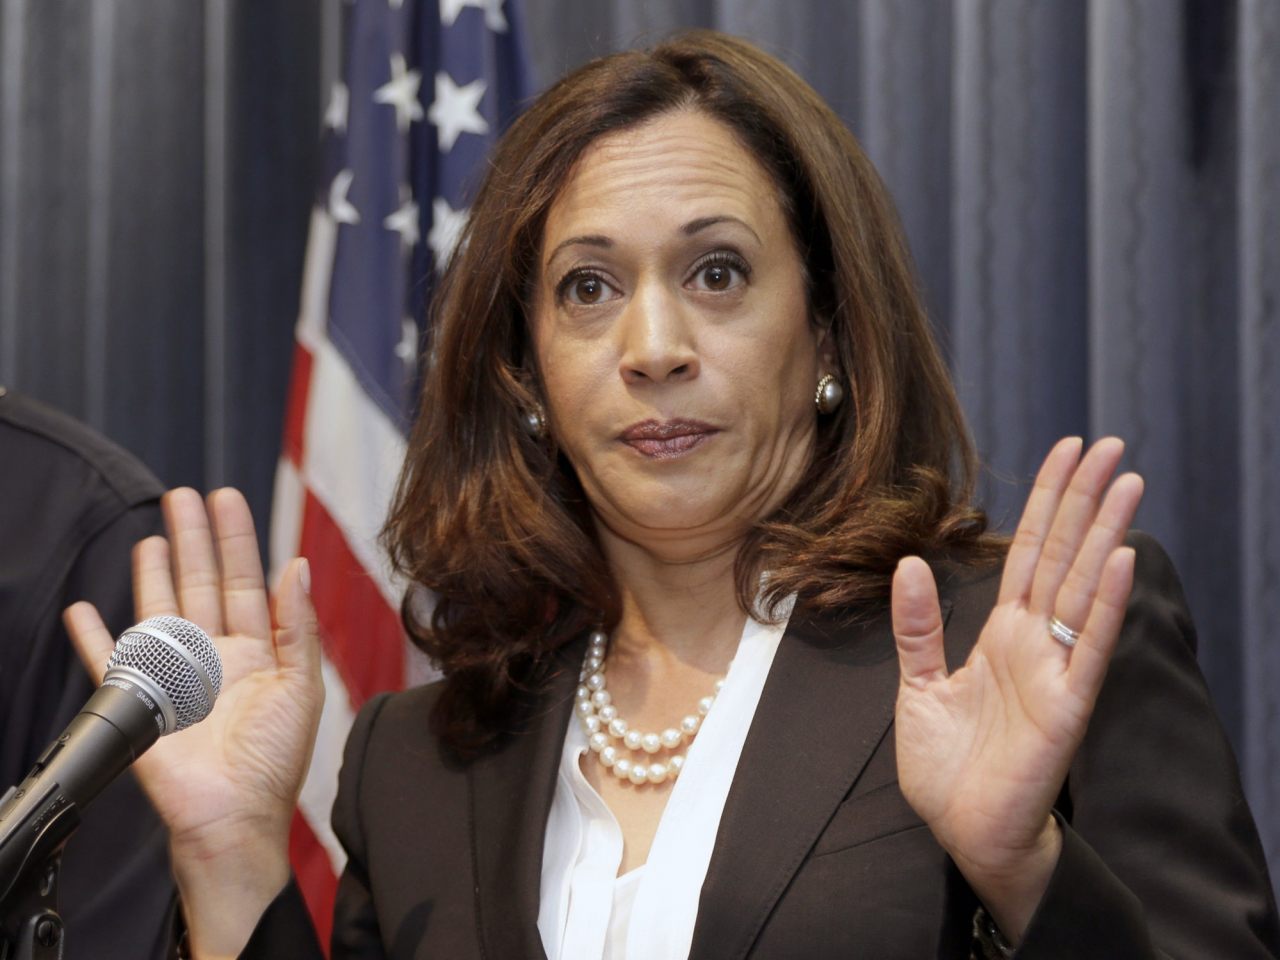 Image: Kamala Harris says relief from Hurricane Ian should be based on skin color, ‘equity,’ meaning whites get helped LAST